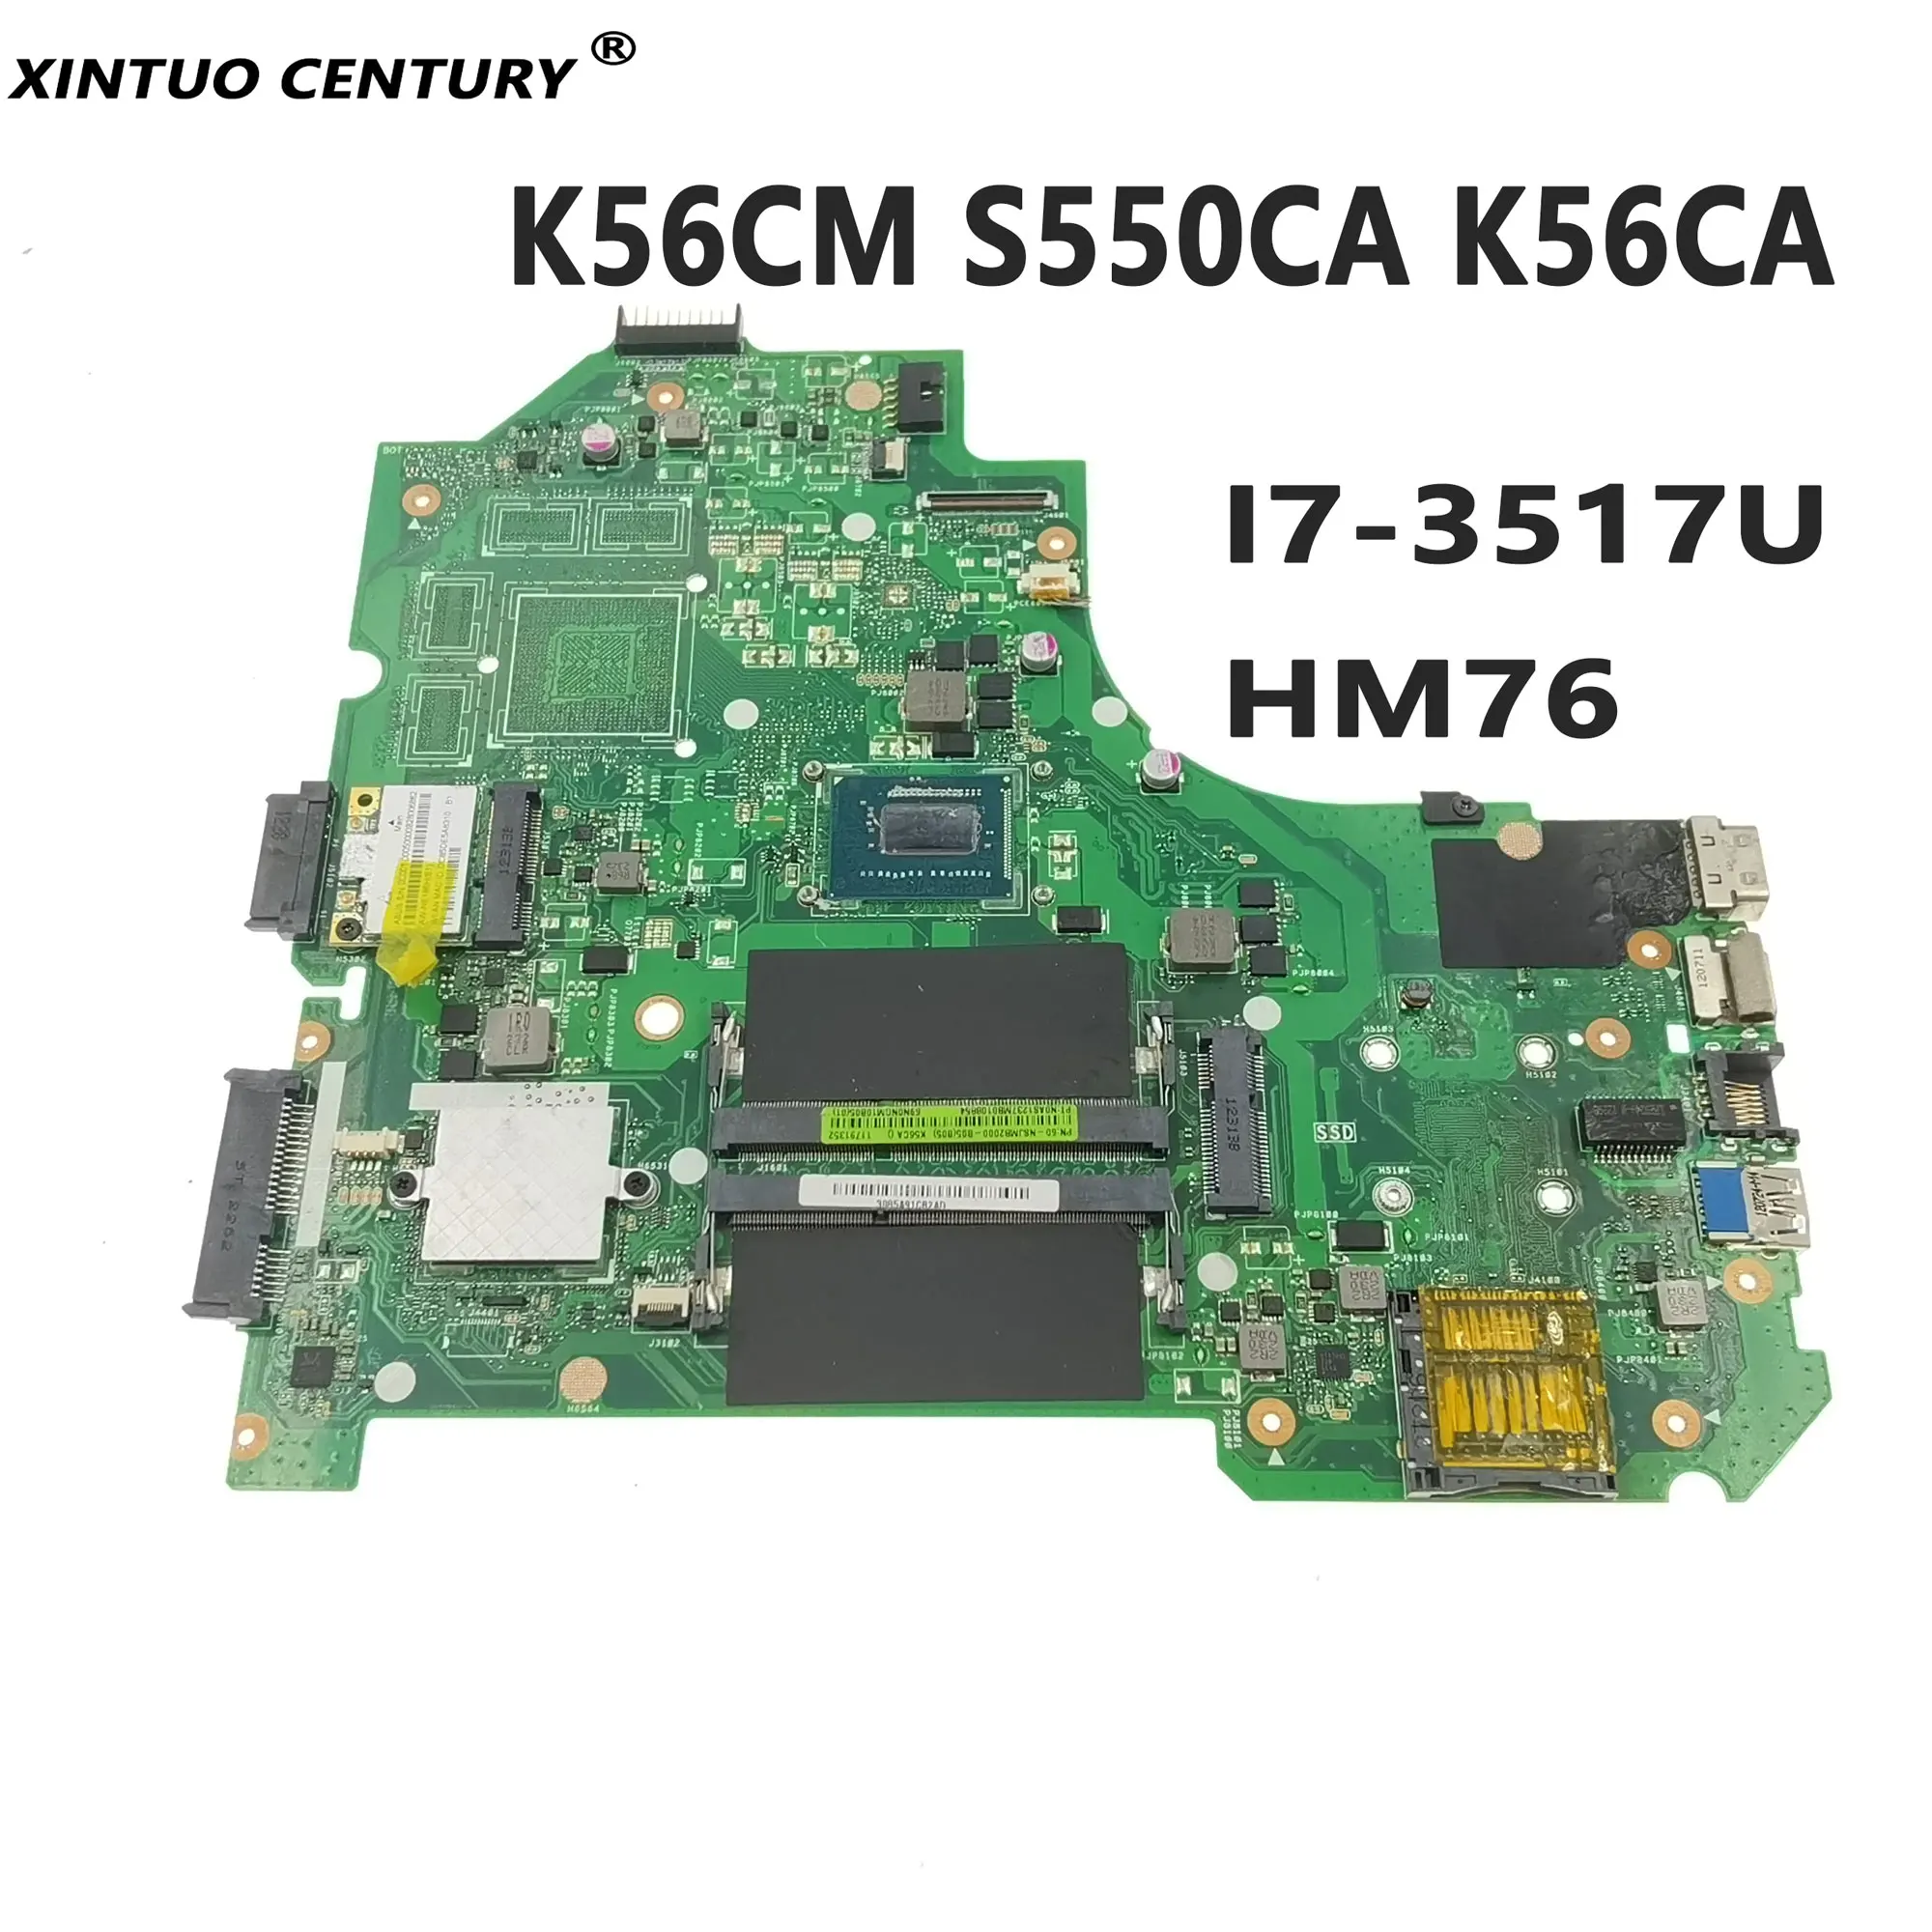 

High Quality K56CM motherboard For ASUS S550CA K56CM K56CA laptop motherboard With I7-3517U CPU HM76 UMA HD DDR3 100% Tested